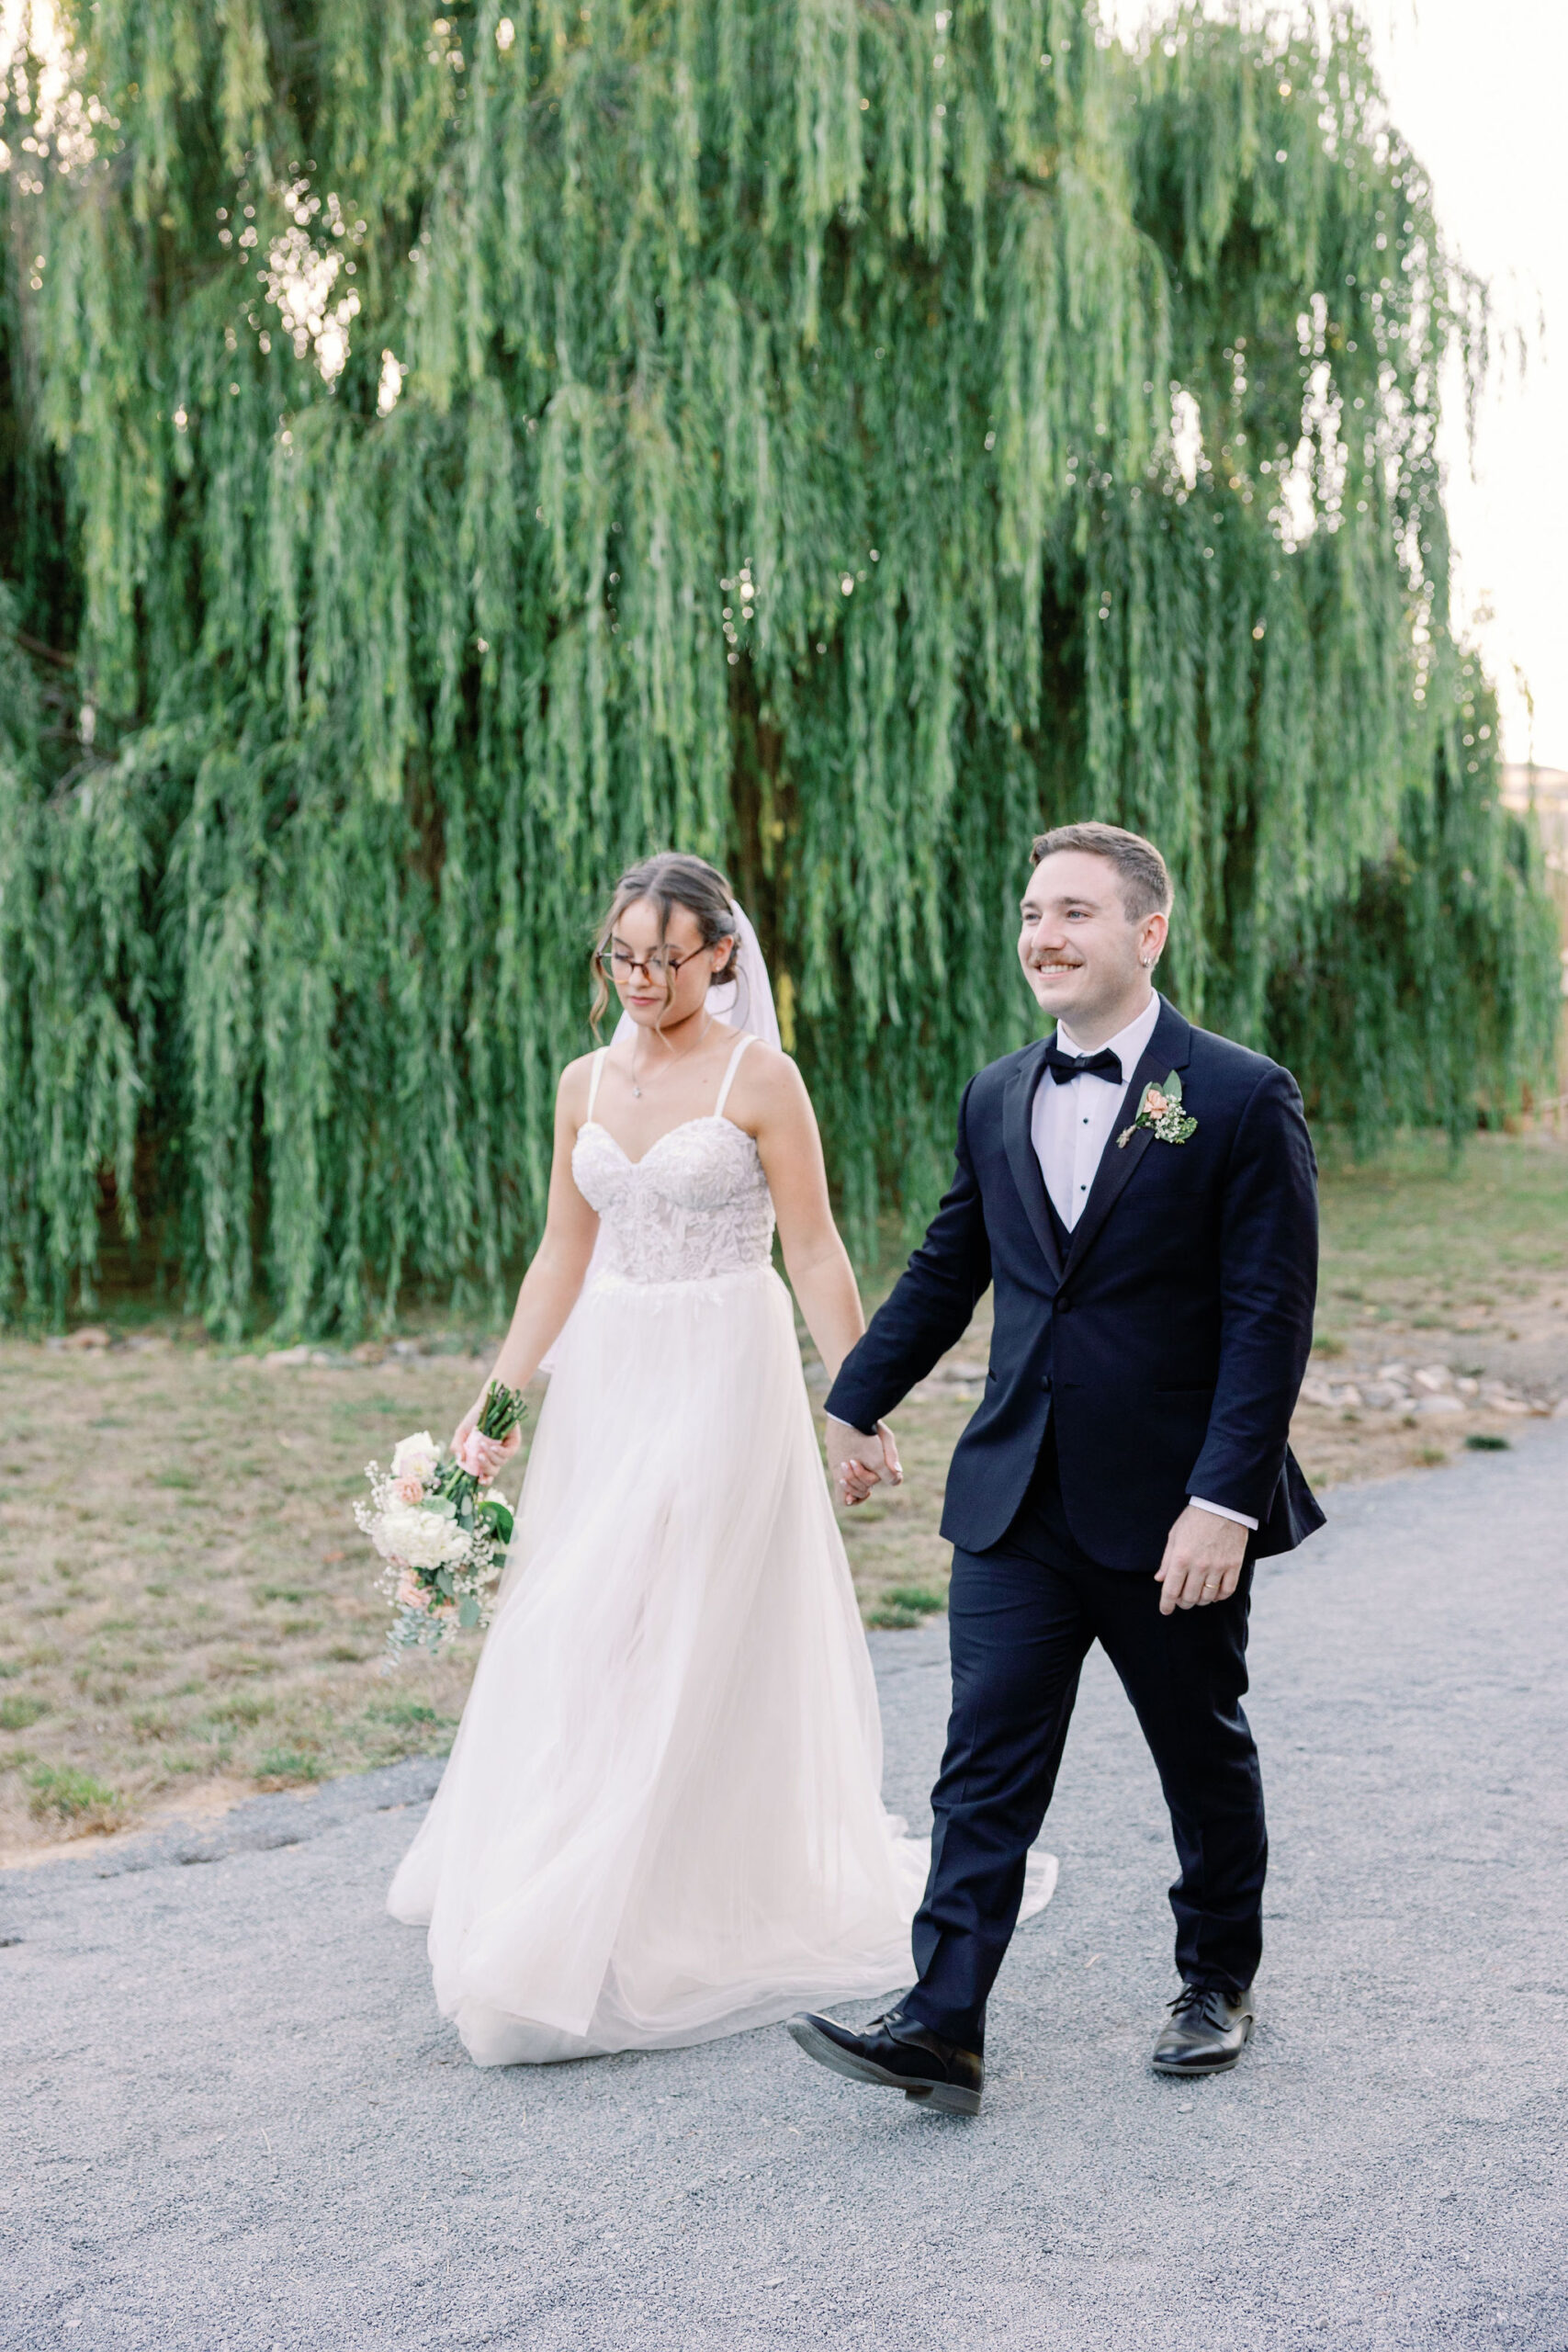 Bay Area wedding photographer captures bride and groom in wedding attire walking around Rosewood Events after wedding ceremony